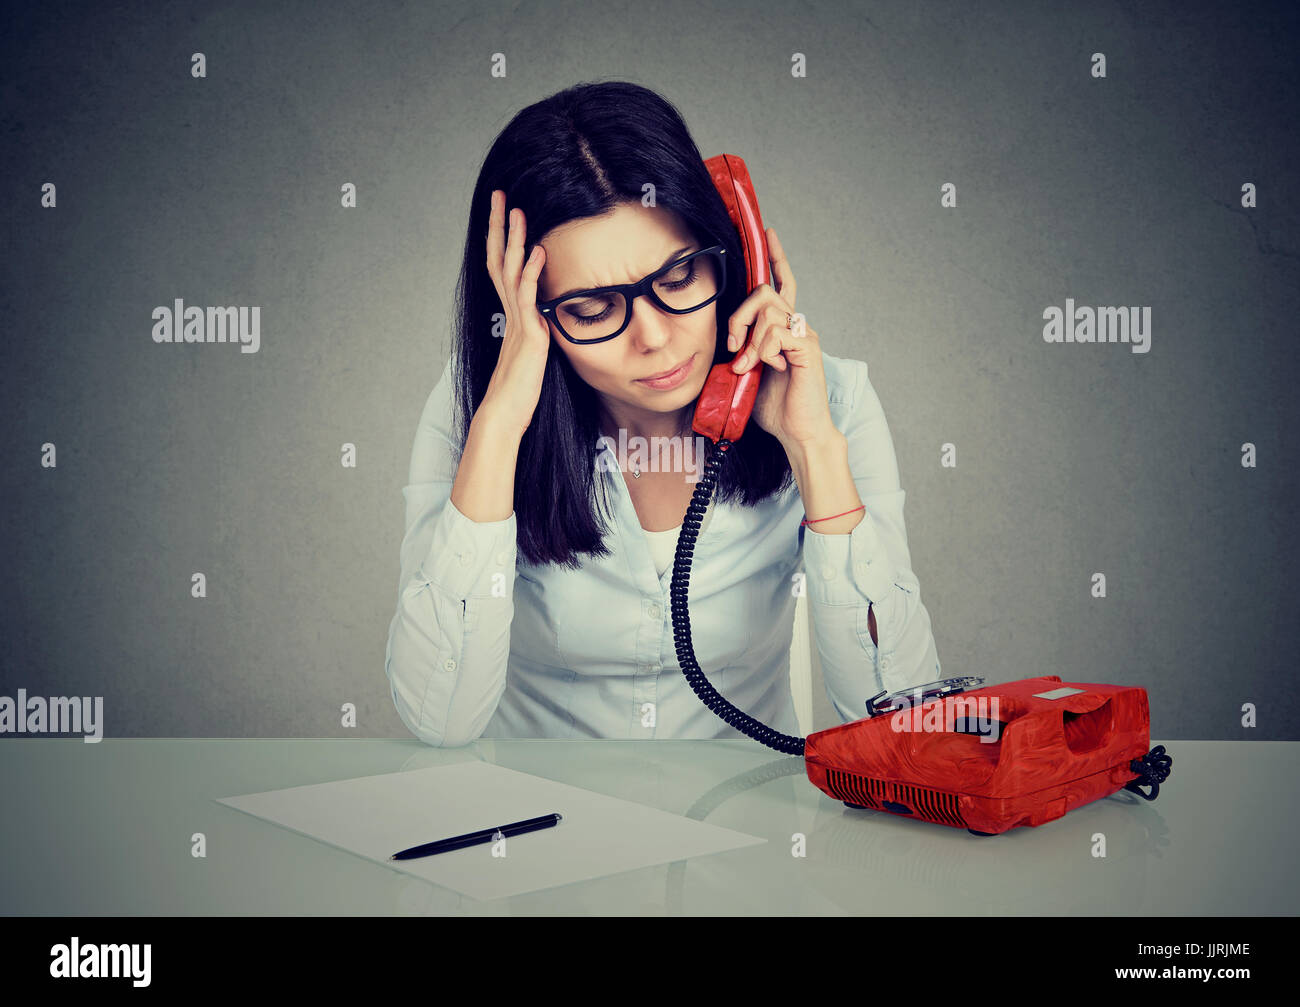 Serious stressed business woman on the phone Stock Photo